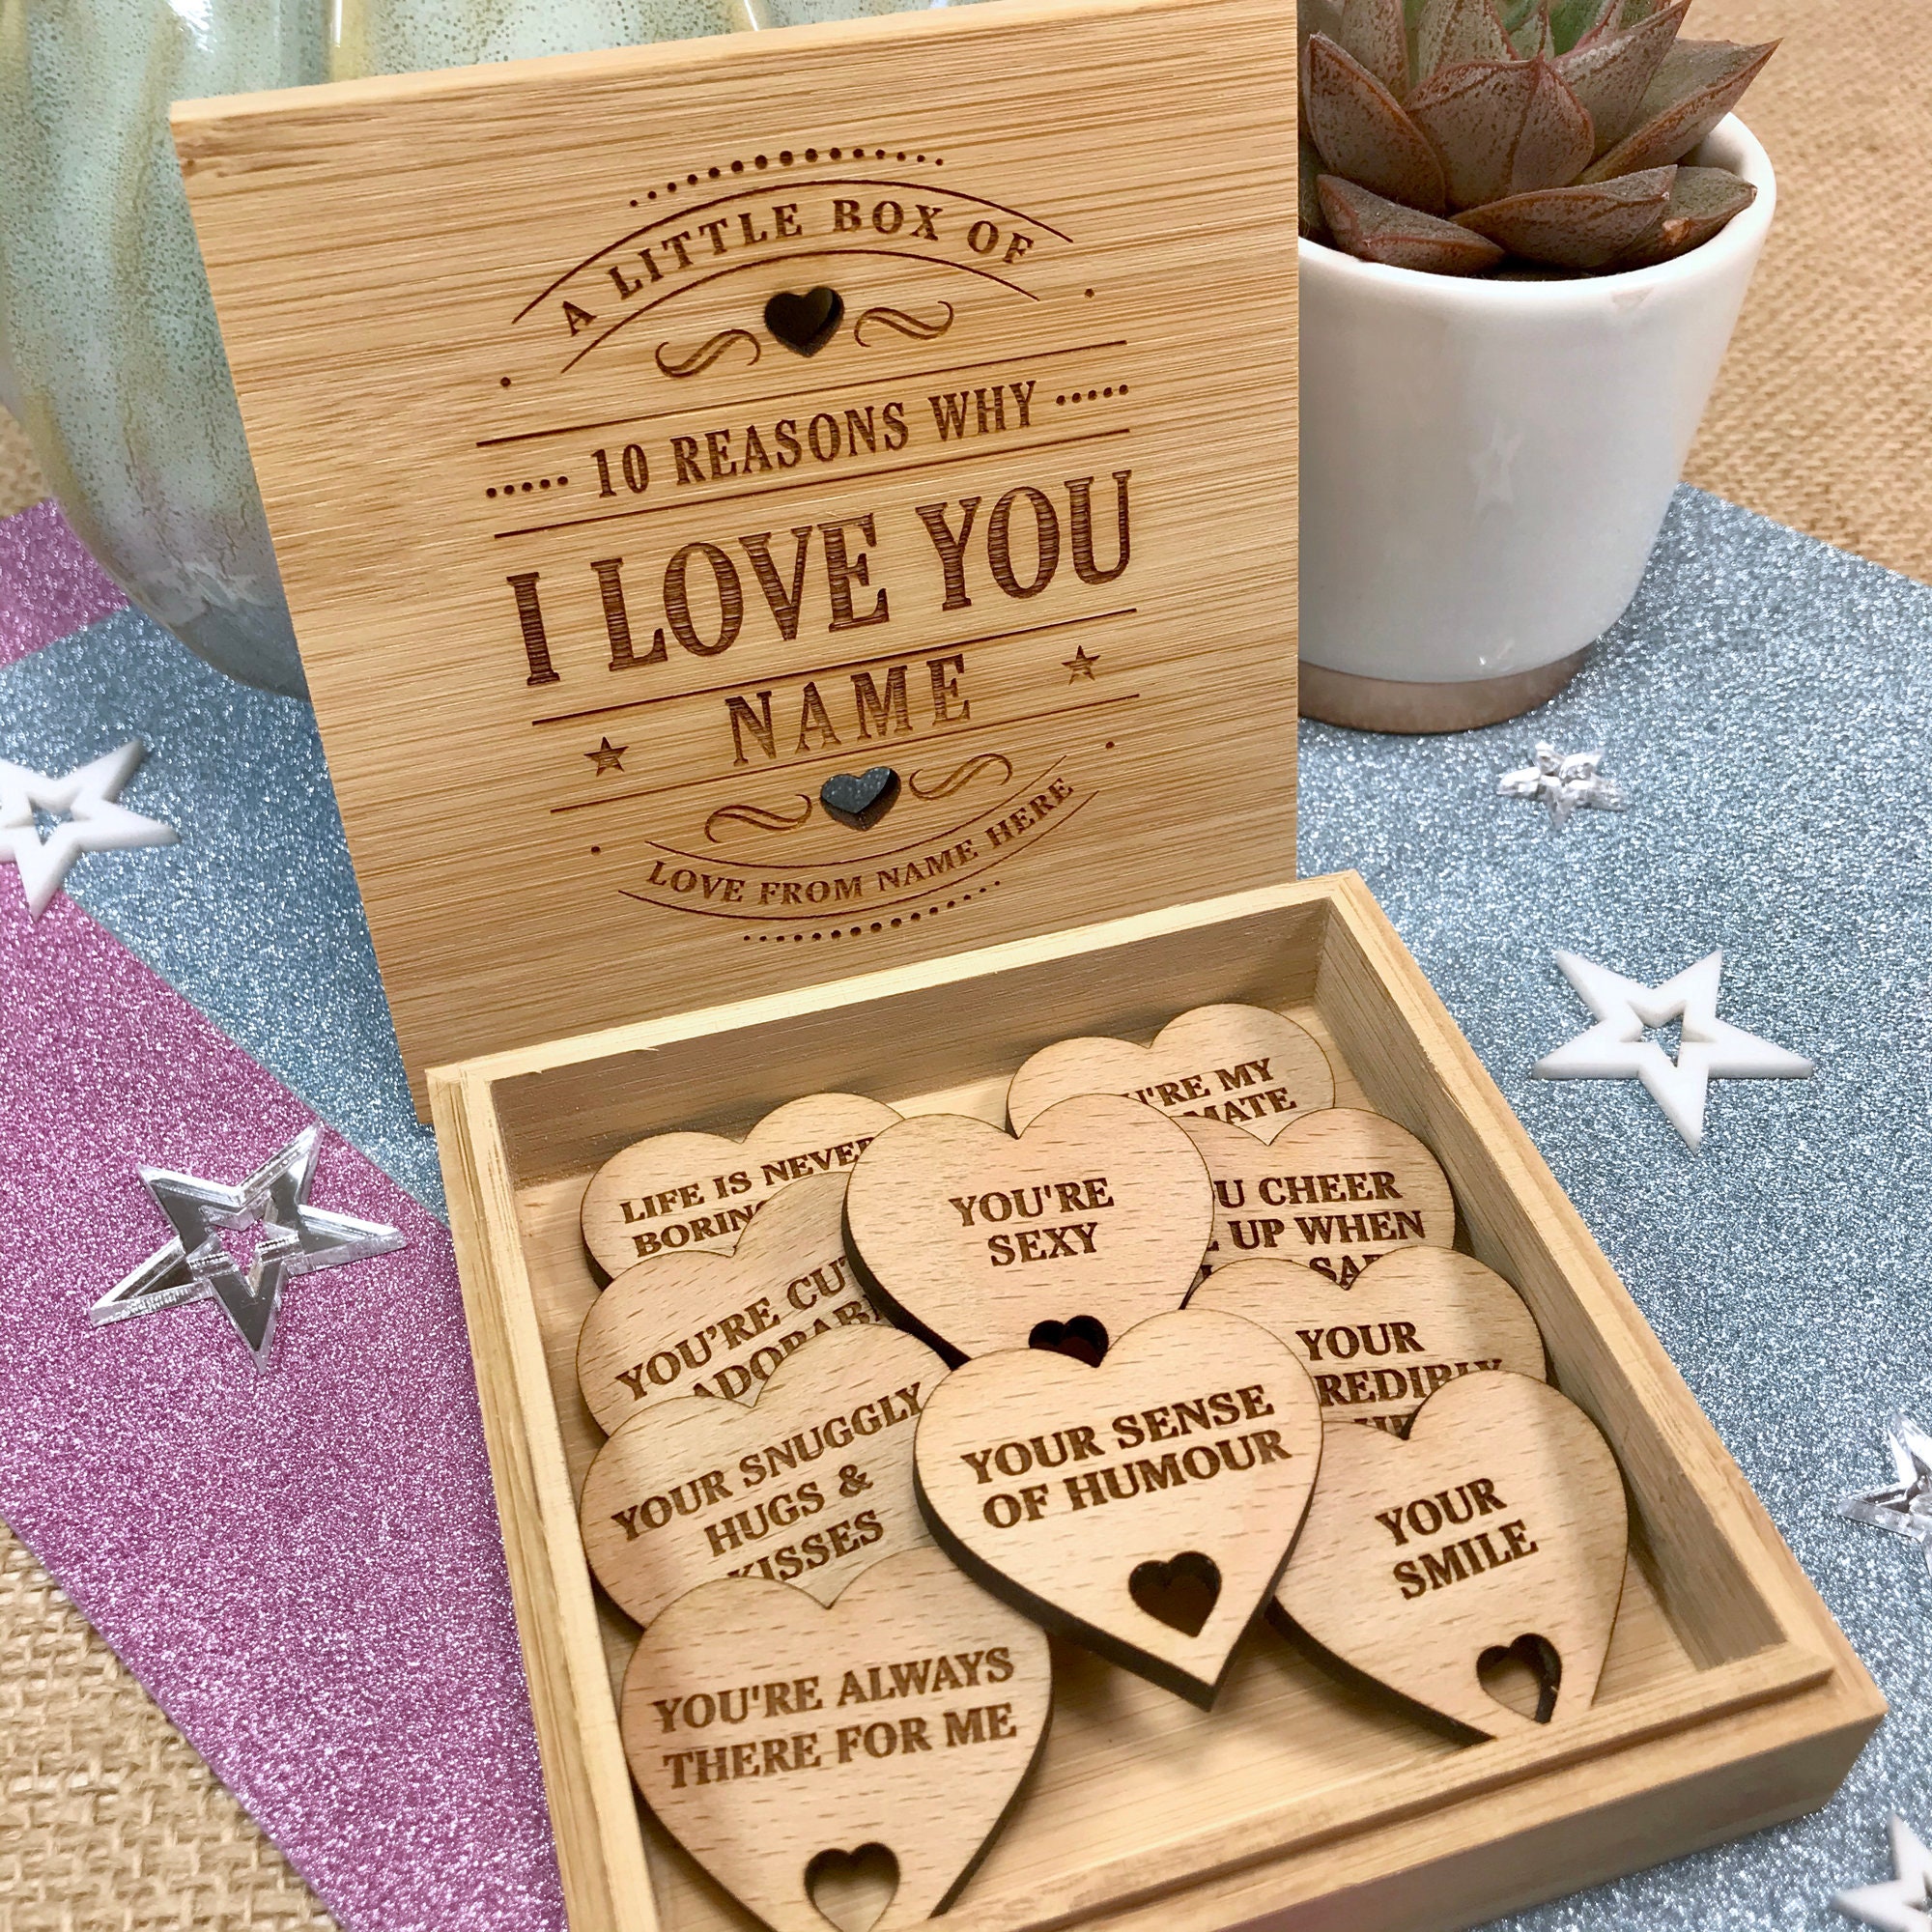 10 Reasons Why I Love You Bamboo Box and Personalised Hearts